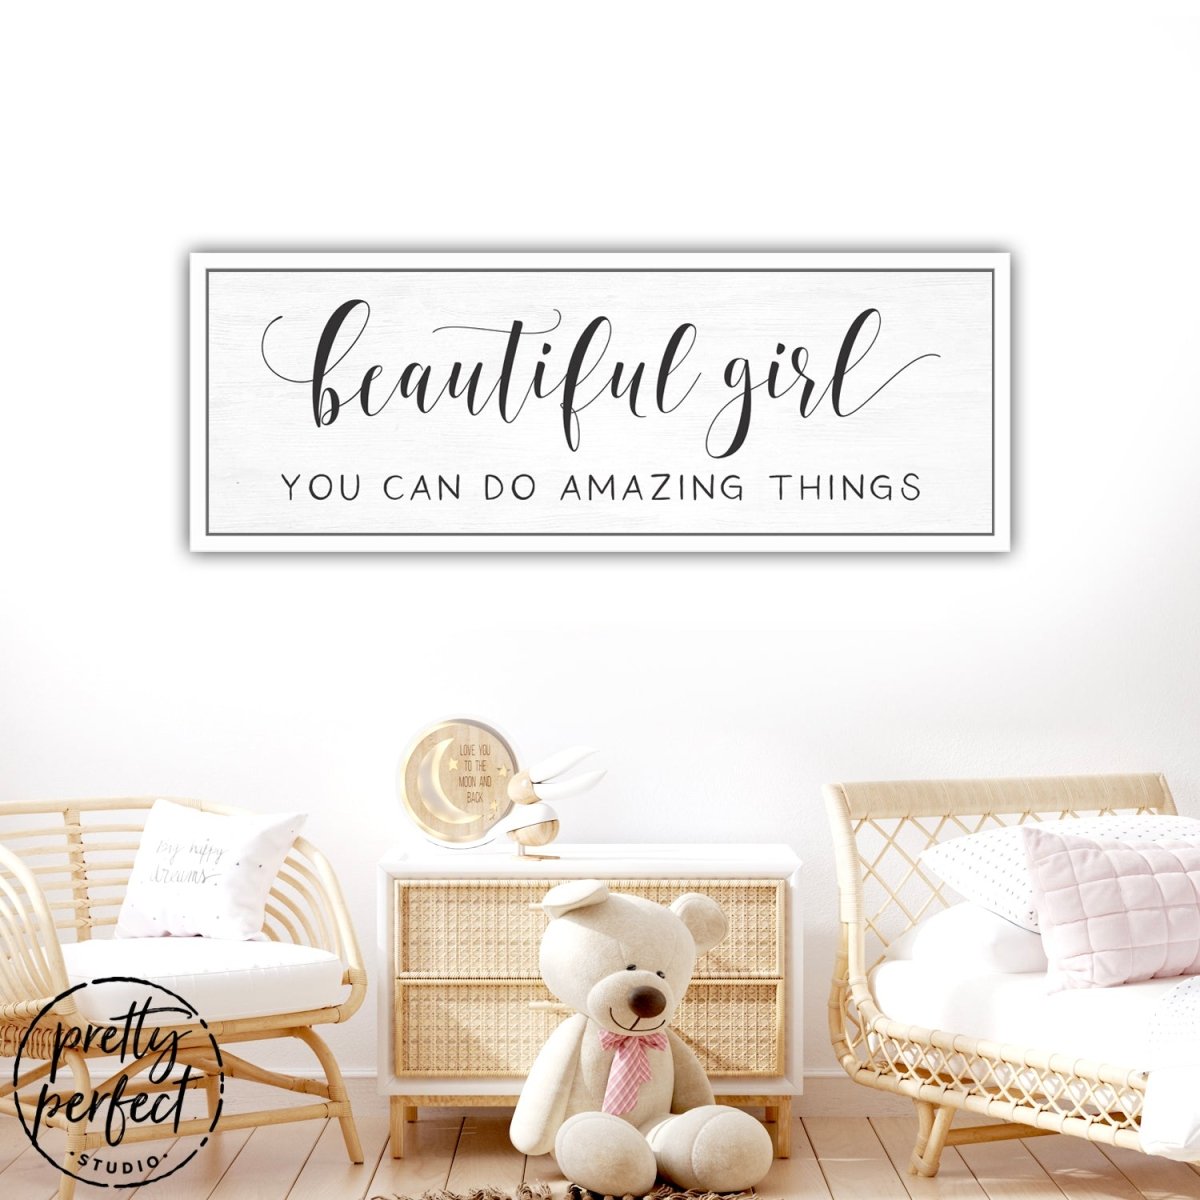 Beautiful Girl You Can Do Amazing Things Sign for Children's Room - Pretty Perfect Studio